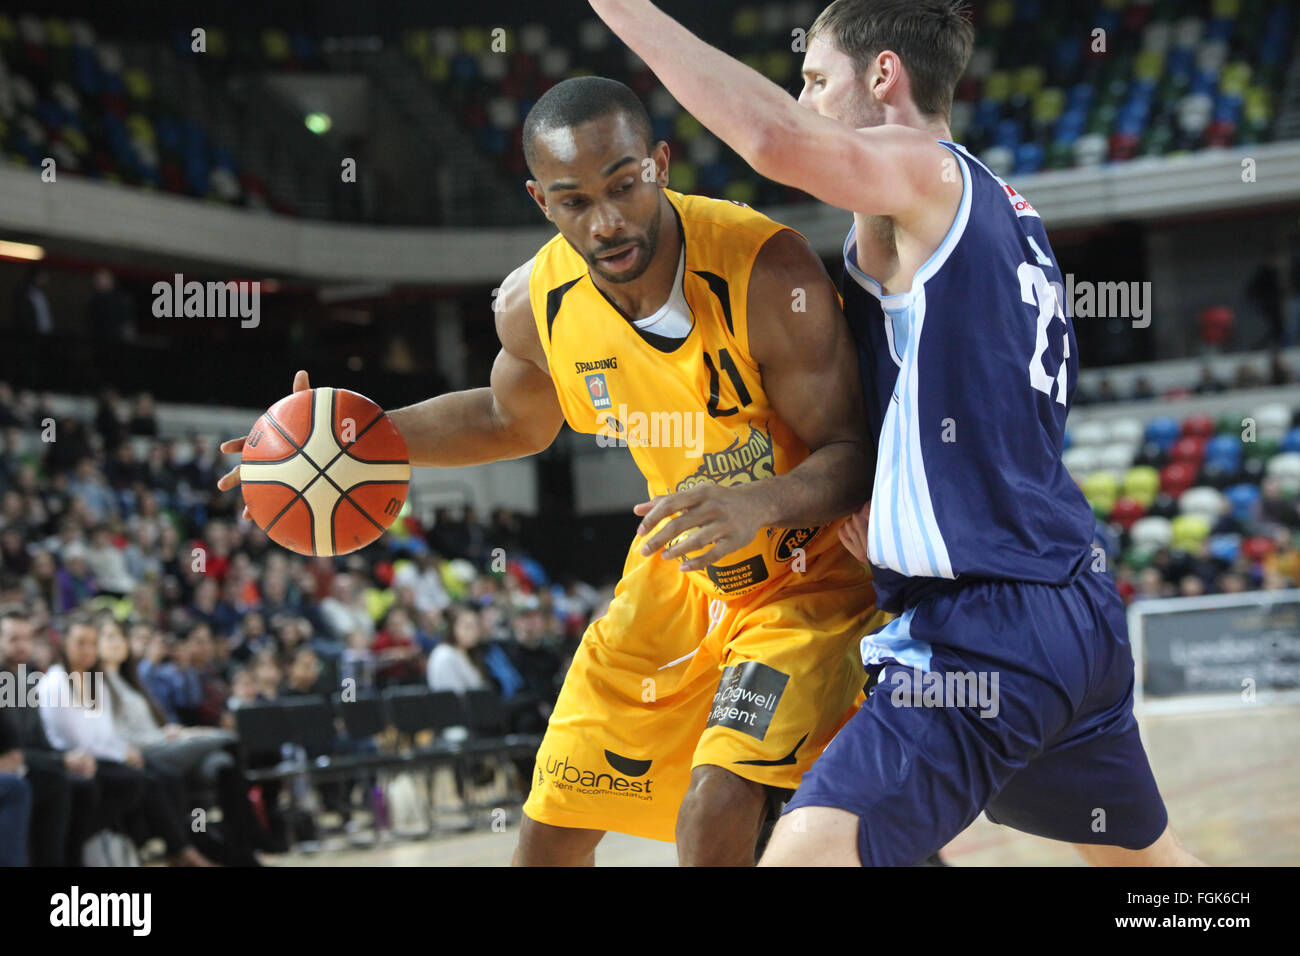 London Lions Basketball High Resolution Stock Photography and Images - Alamy